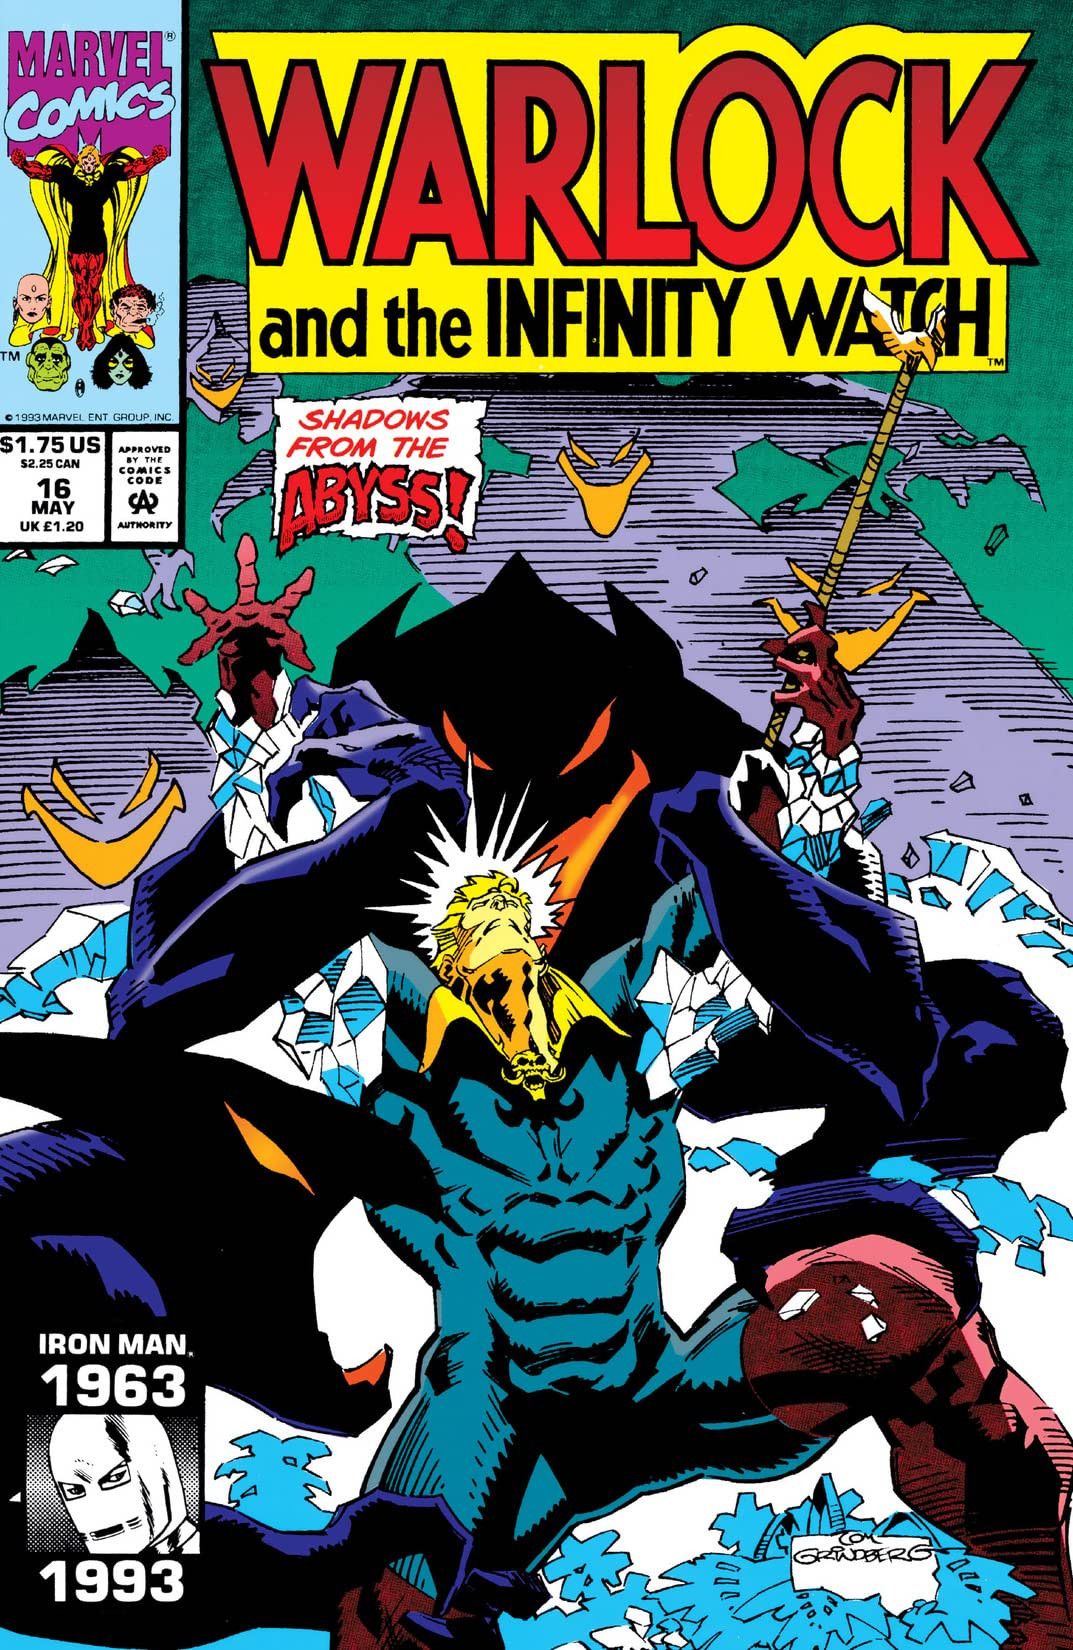 Warlock and the Infinity Watch #23 - Blood and Thunder, Part 4: Clash  (Issue)